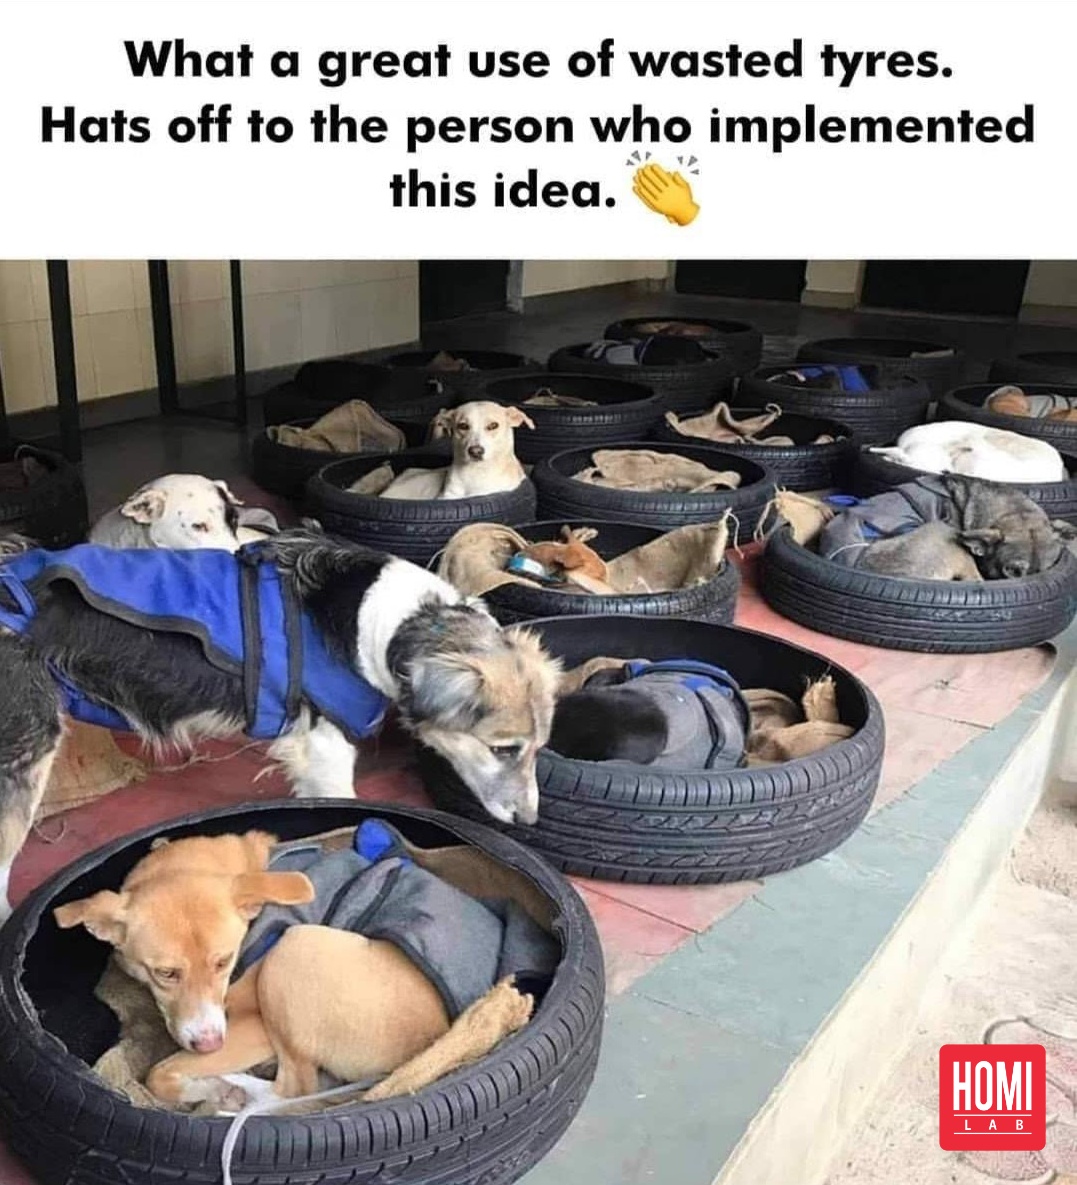 Turning trash into tails! 🐾♻️
These recycled tires have found a new purpose as cozy doggy homes! 🏠❤️ Give abandoned pups a safe and sustainable shelter.
#EcoDogHomes #WasteToWoofers #RecycledRescue #TiresToTails #GreenLiving #PawsitiveImpact